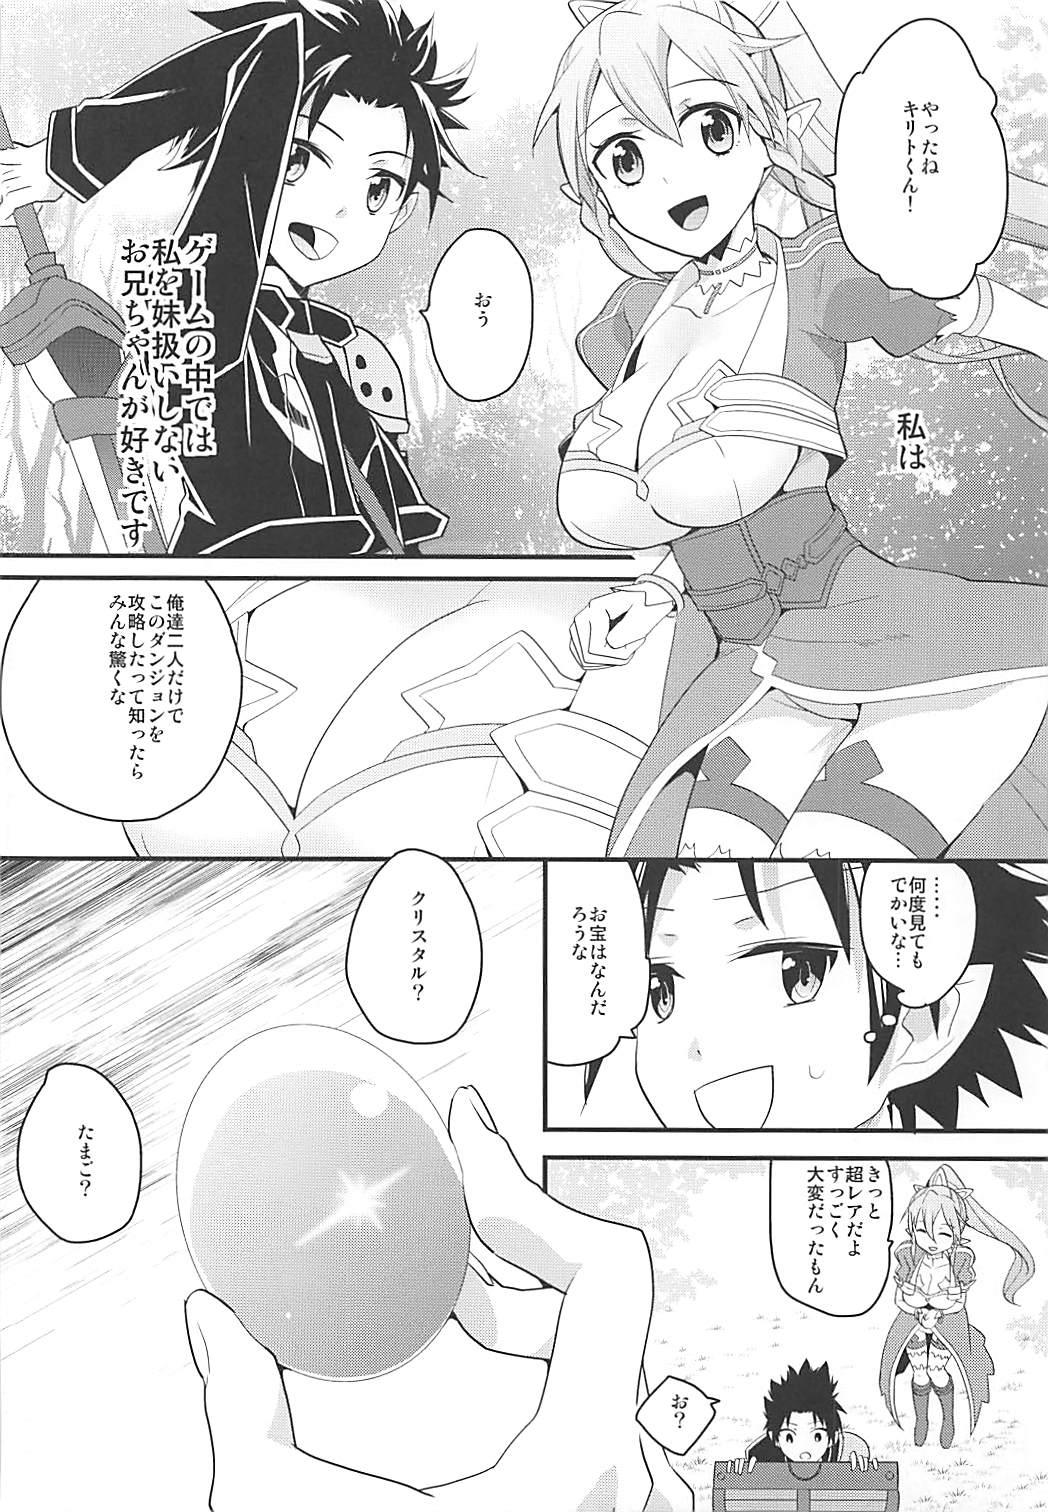 Putaria Perfect Sister - Sword art online Doublepenetration - Page 3